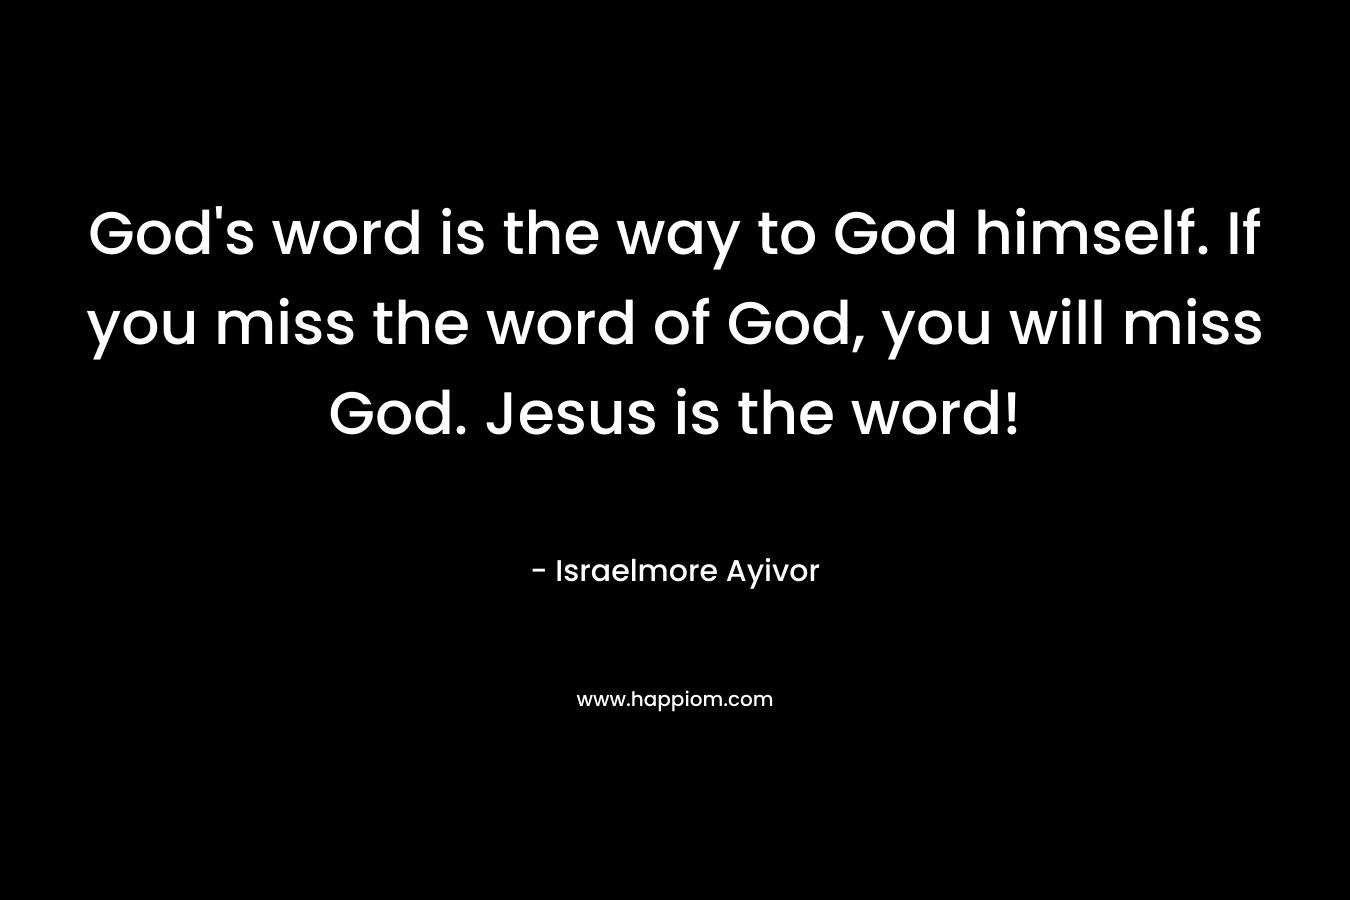 God's word is the way to God himself. If you miss the word of God, you will miss God. Jesus is the word!